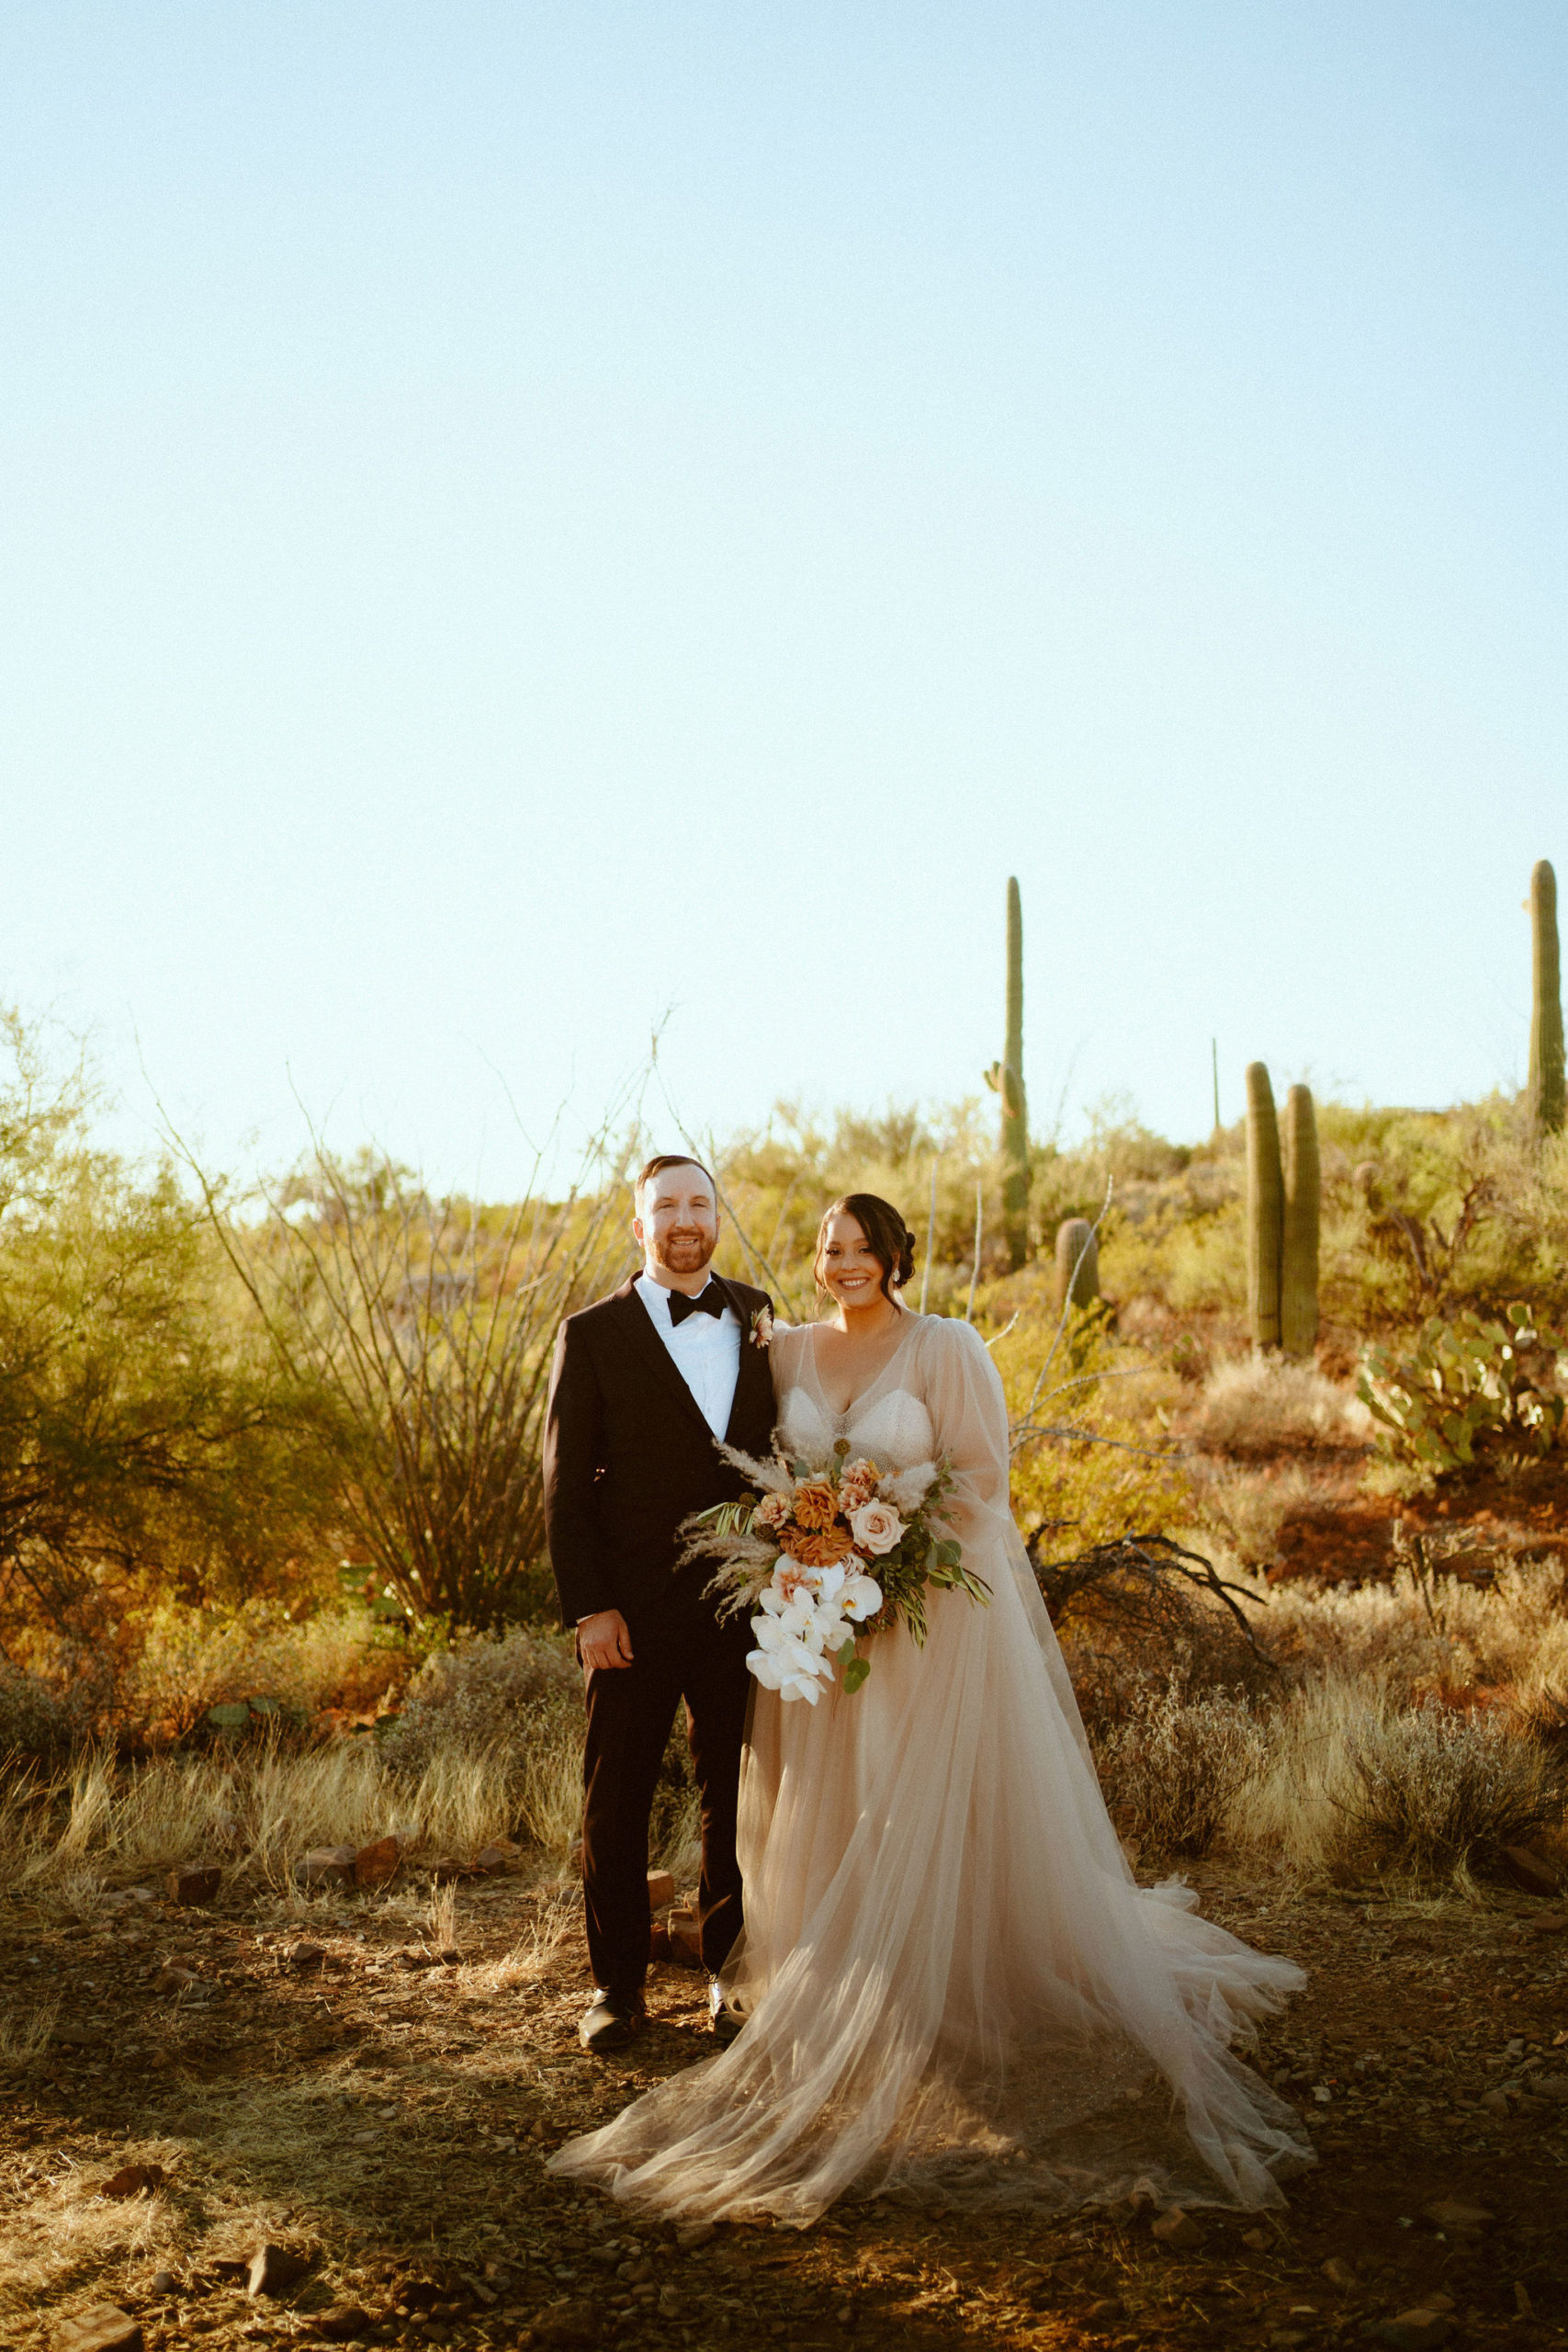 Saguaro National Park Micro-Wedding. The happy newlyweds pose for some newlywed photos in the desert